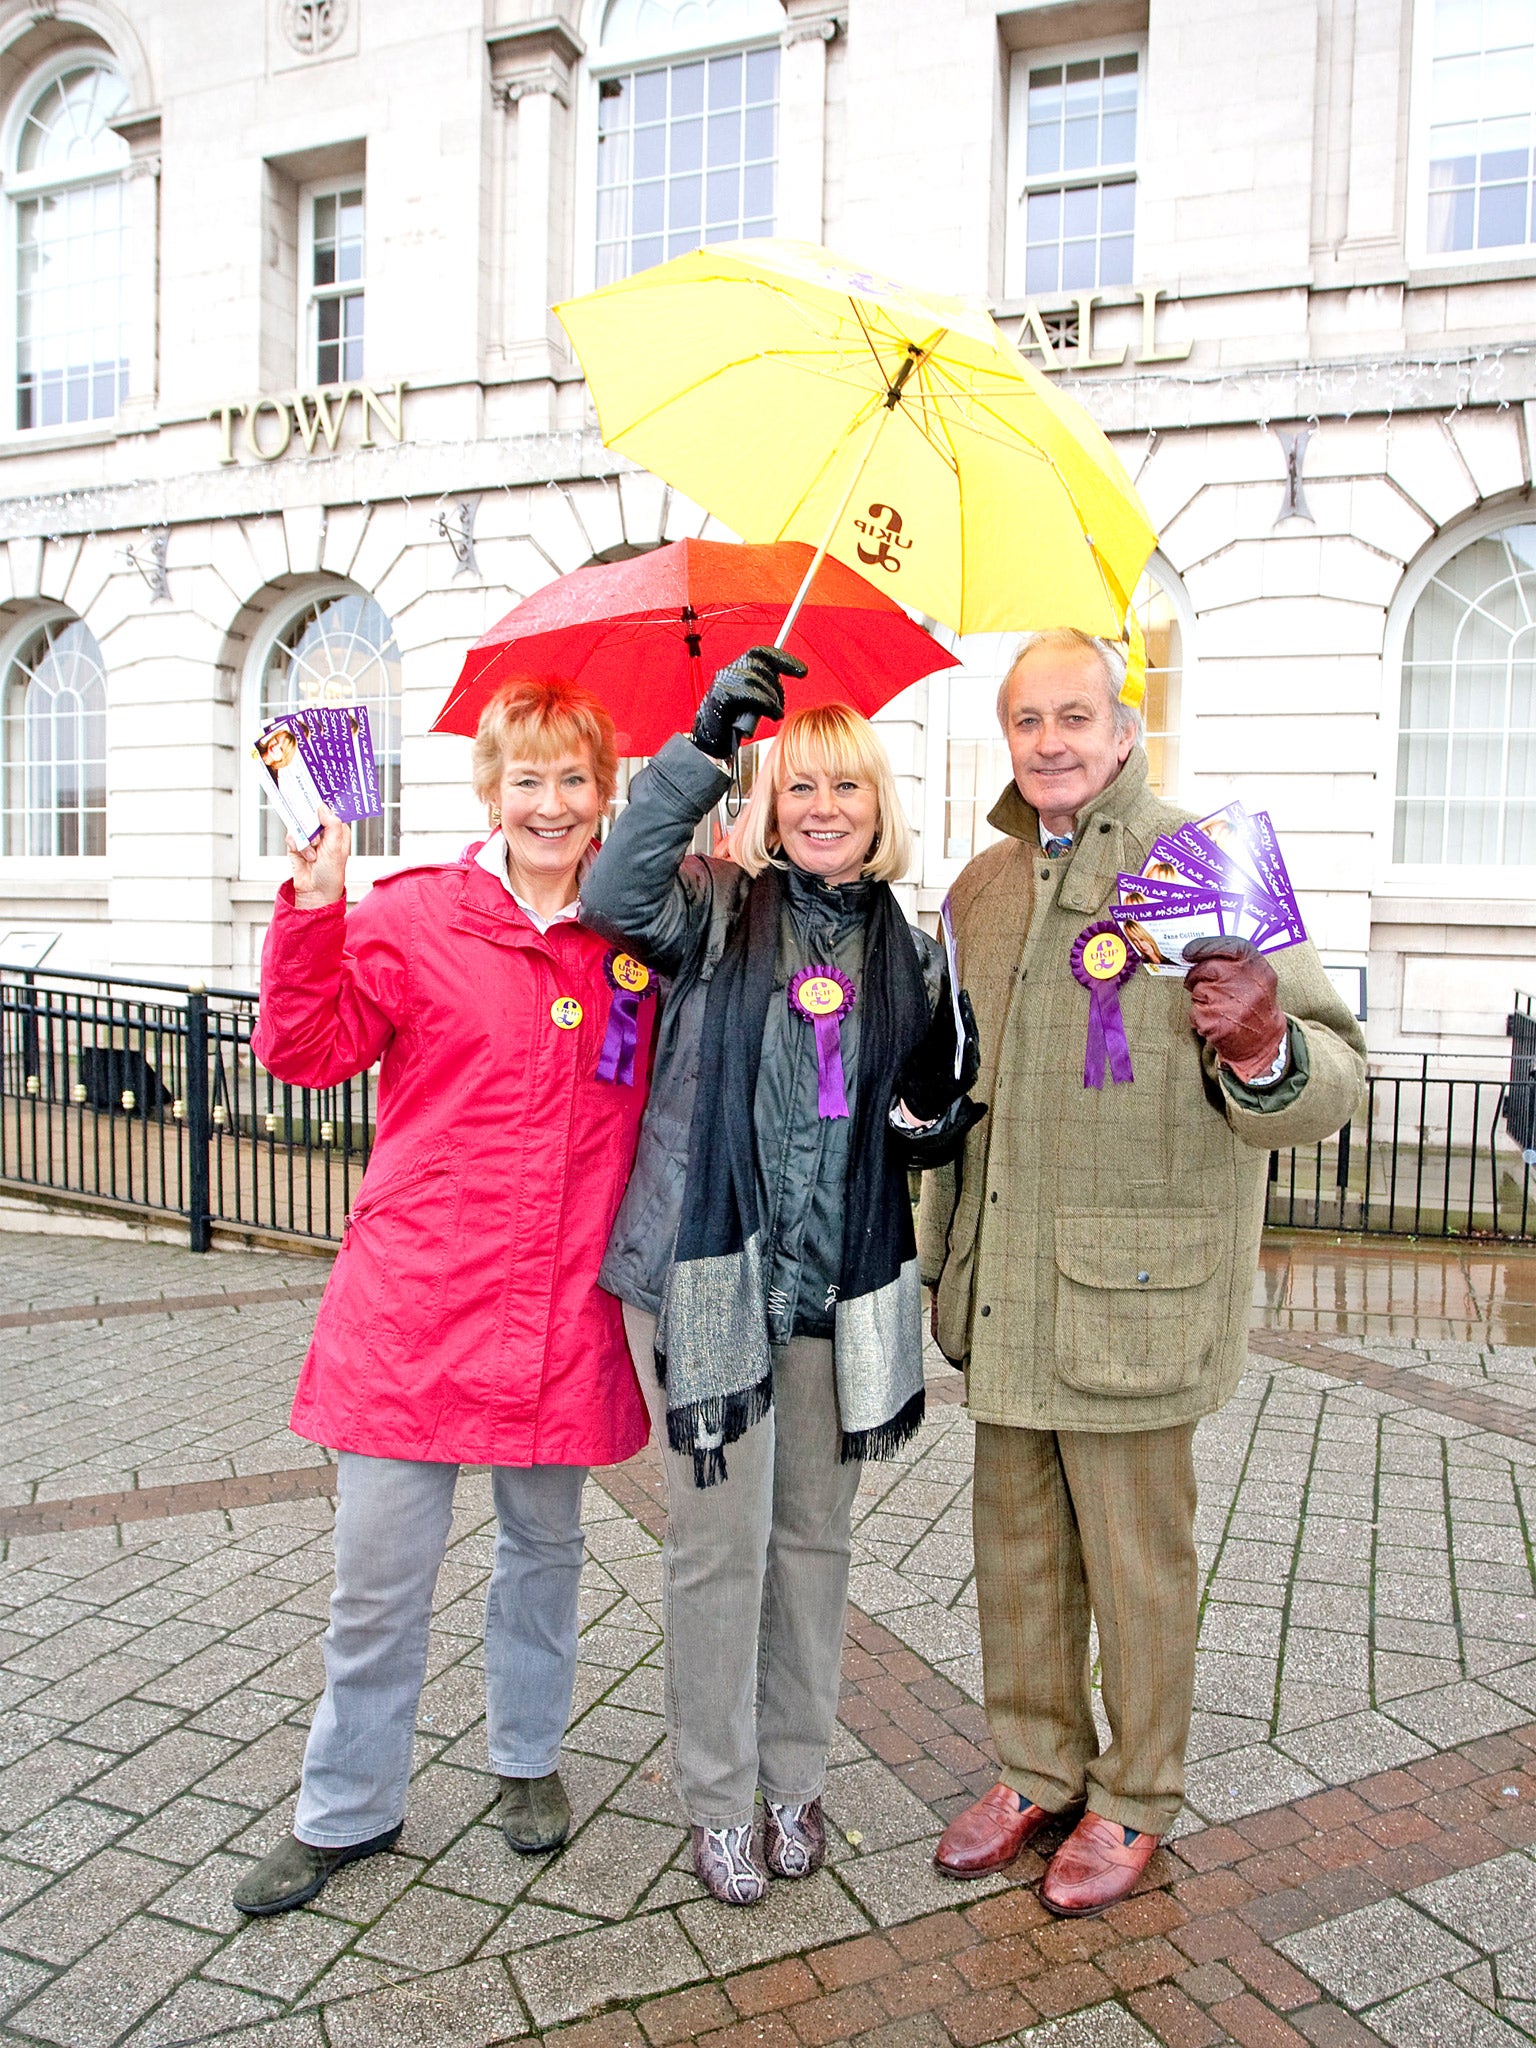 Neil and Christine Hamilton with Ukip candidate Jane Collins in Rotherham